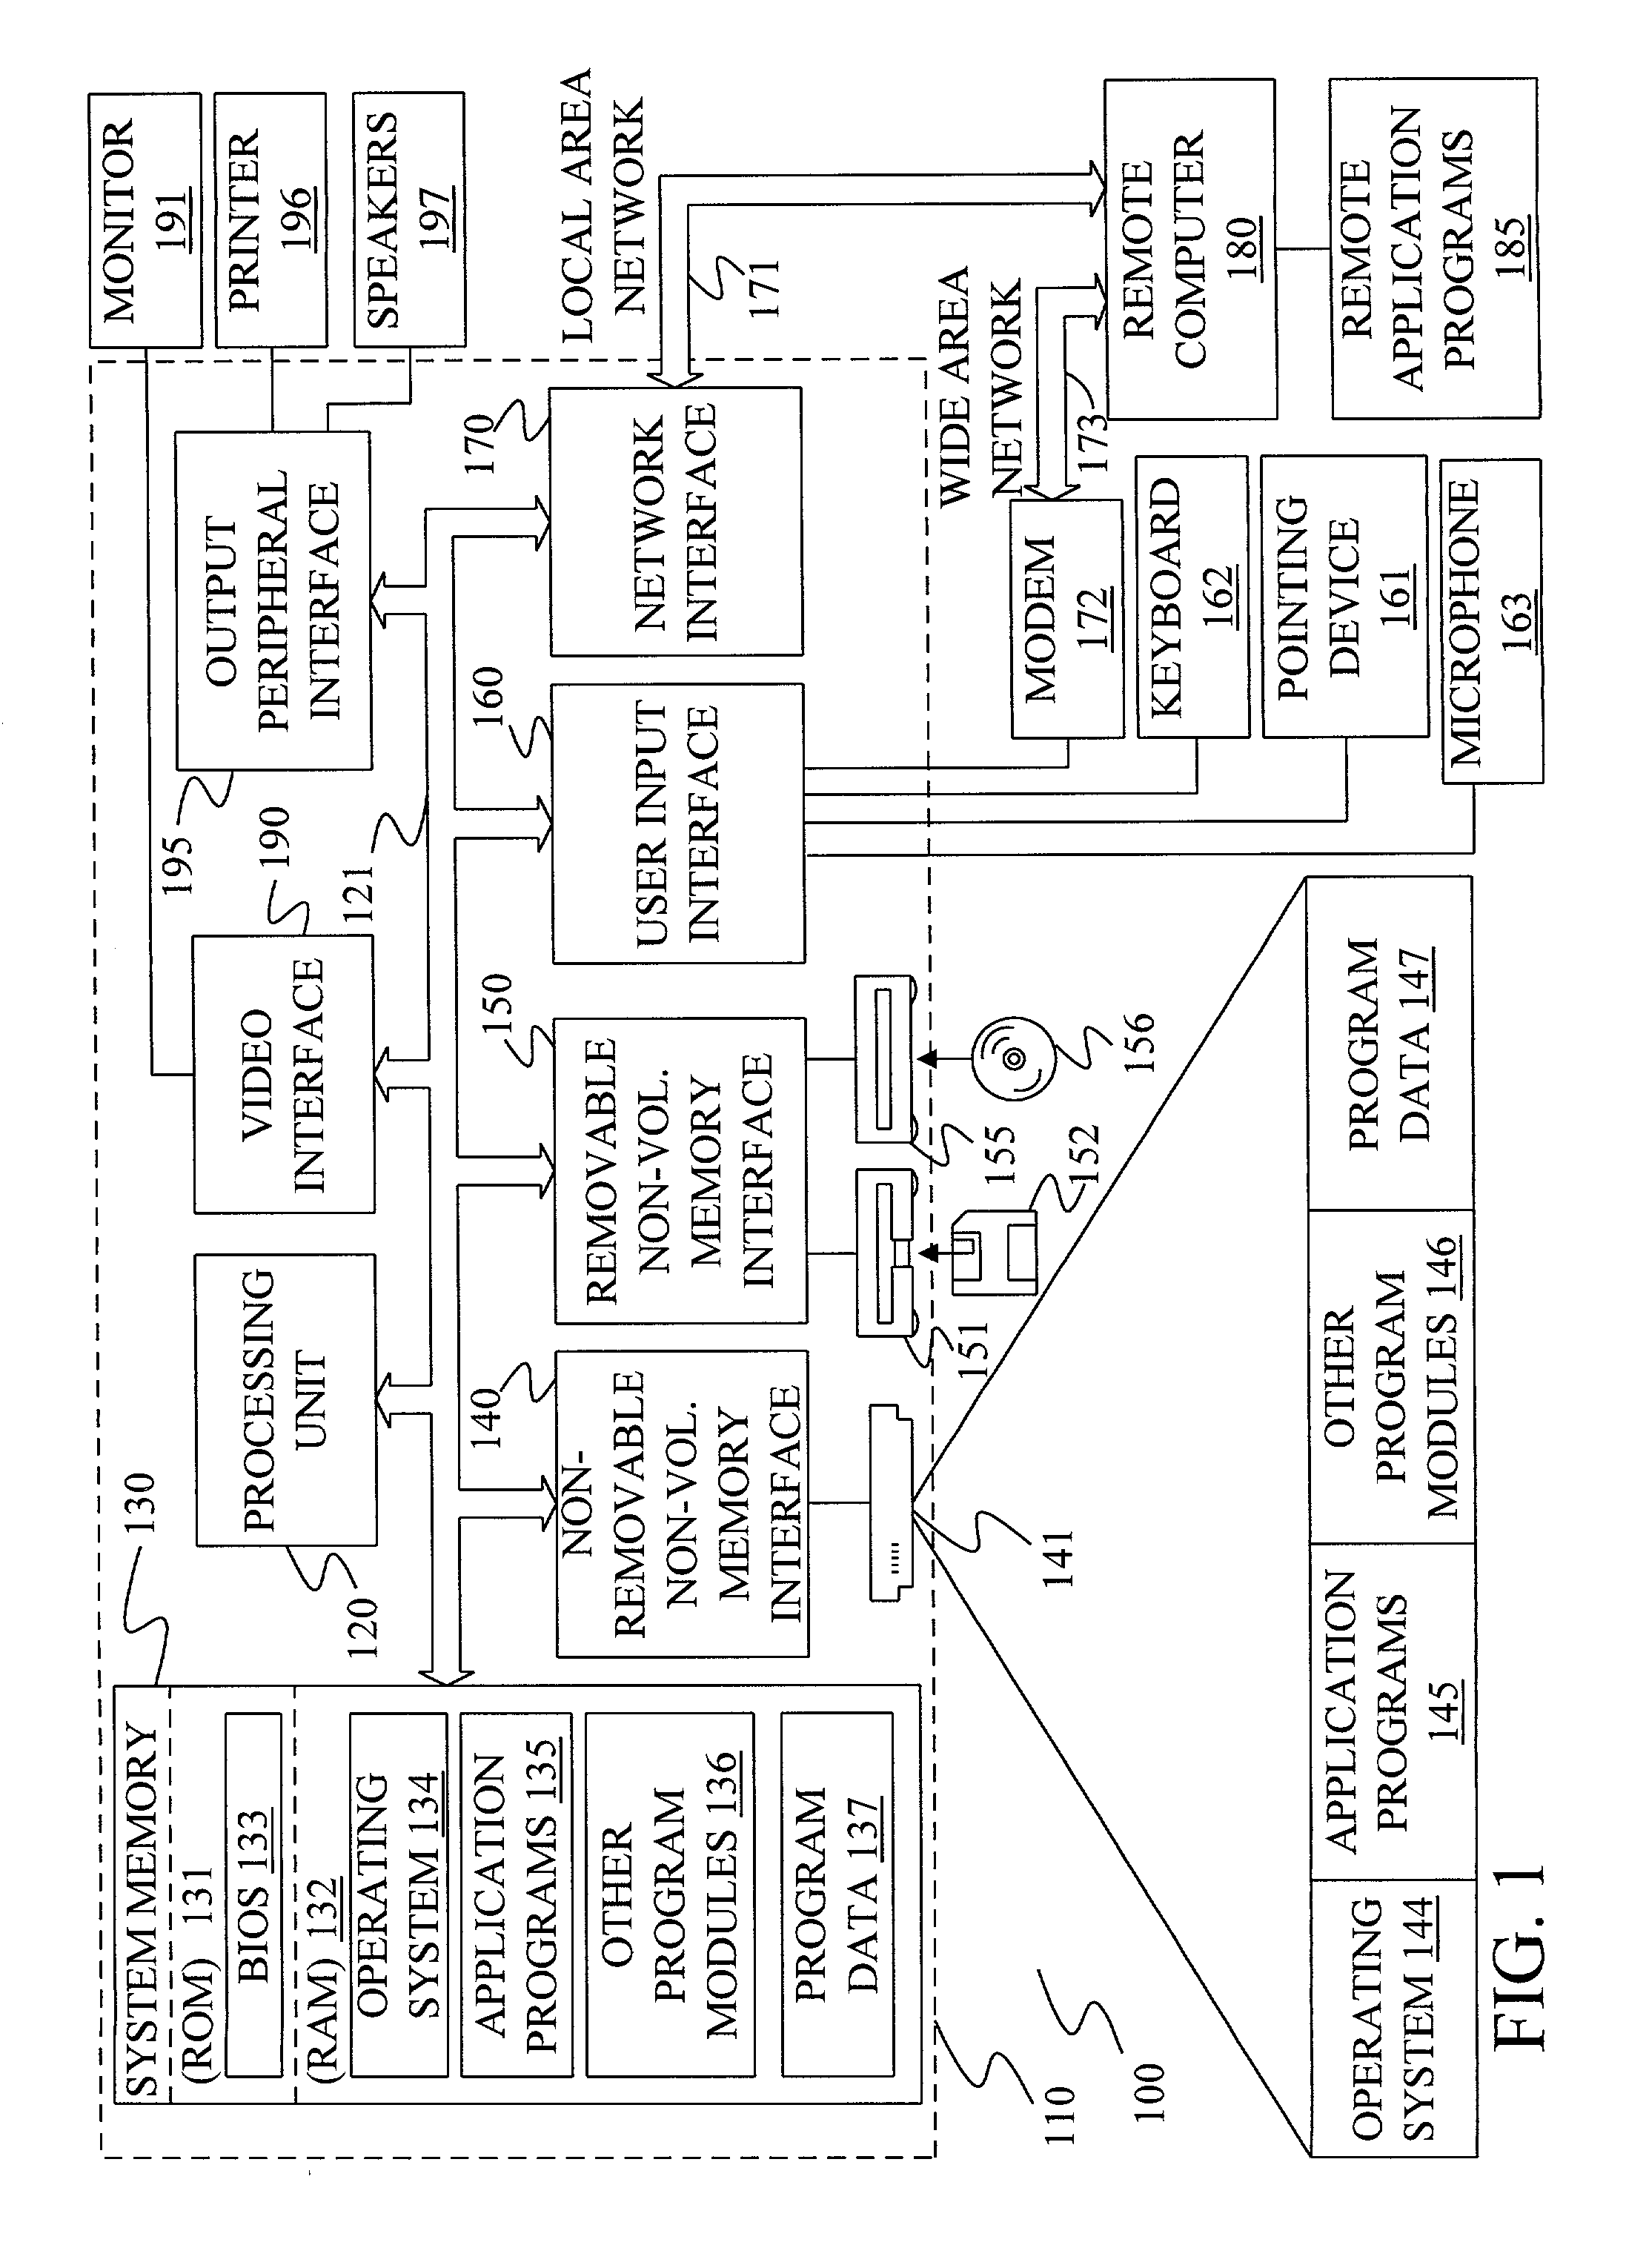 Tokenizer for a natural language processing system